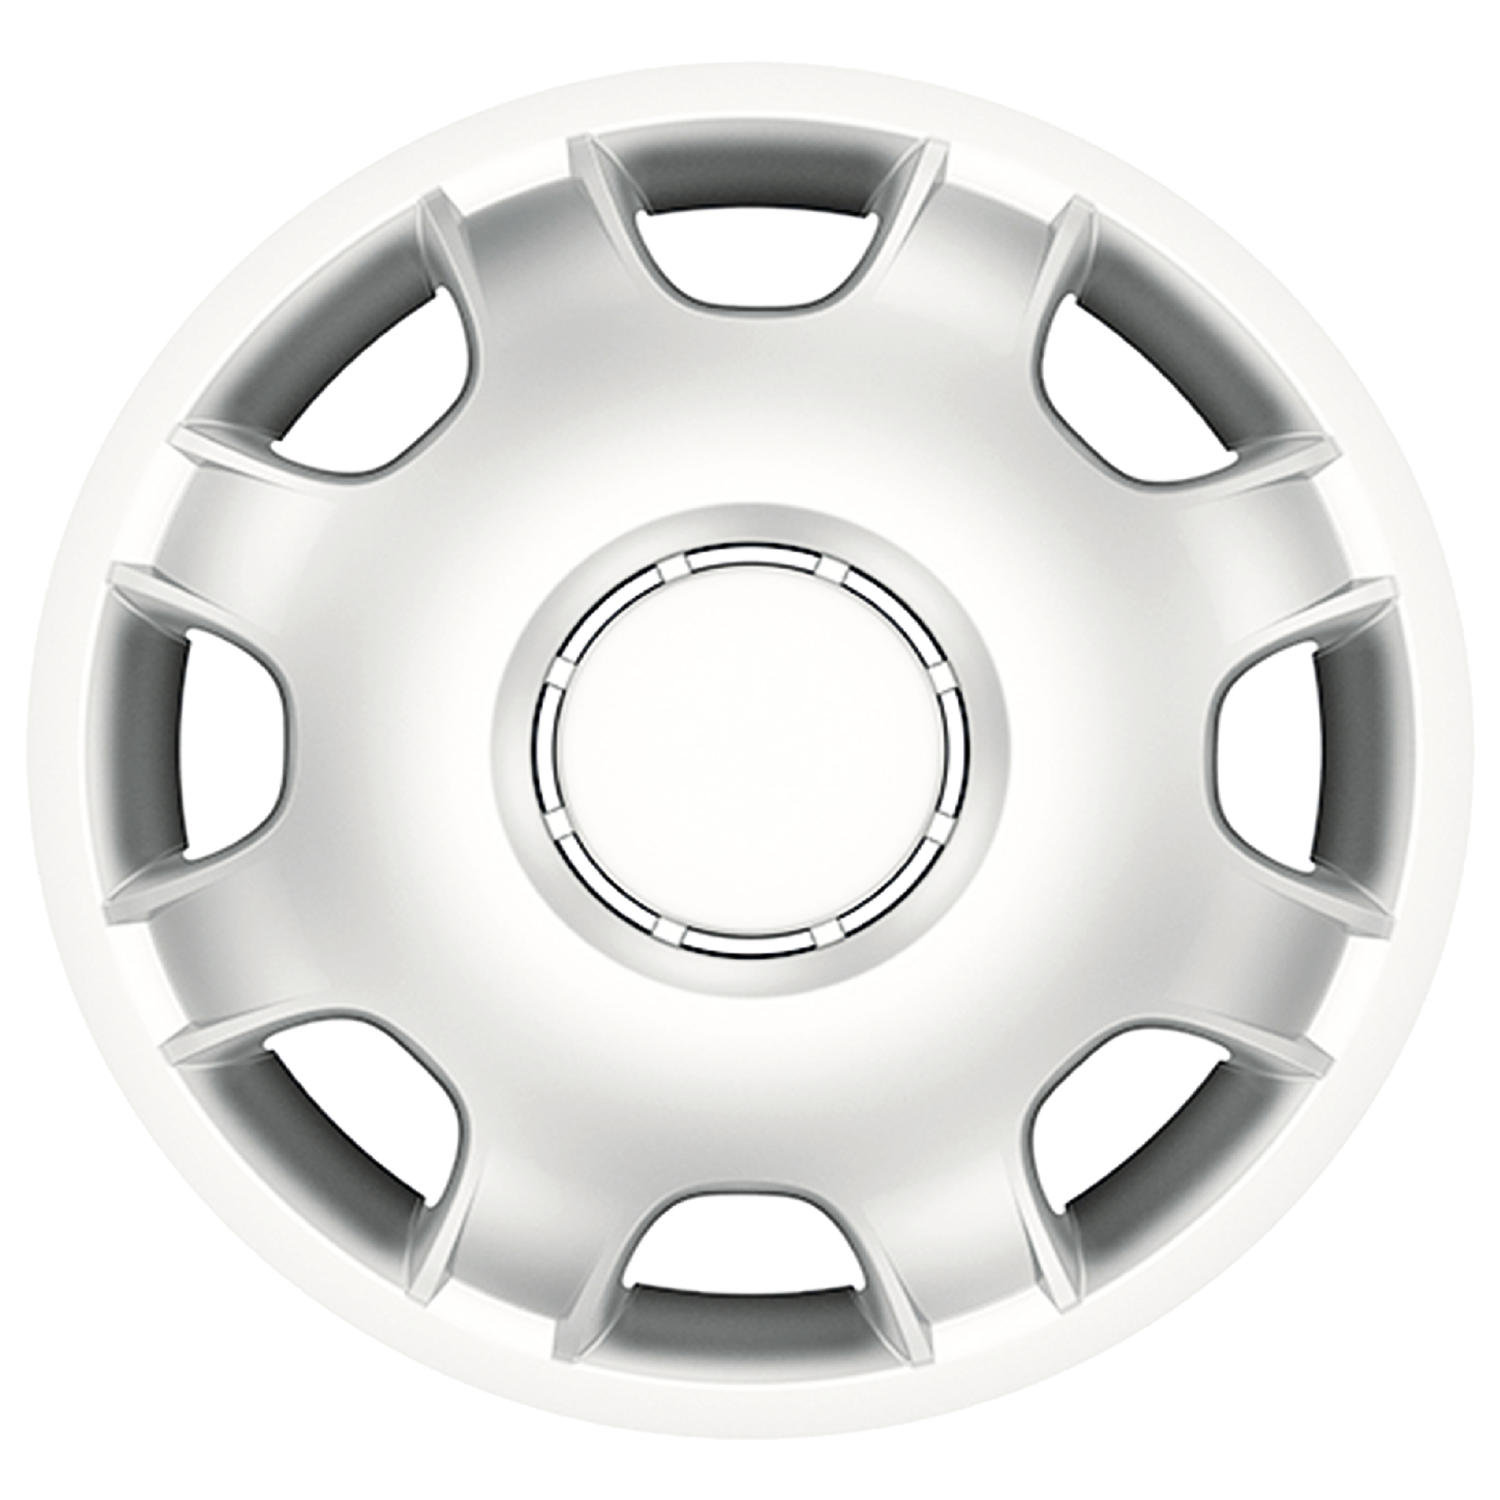 Simply Auto 15 inch Brawn Commercial Wheel Trims Image 2